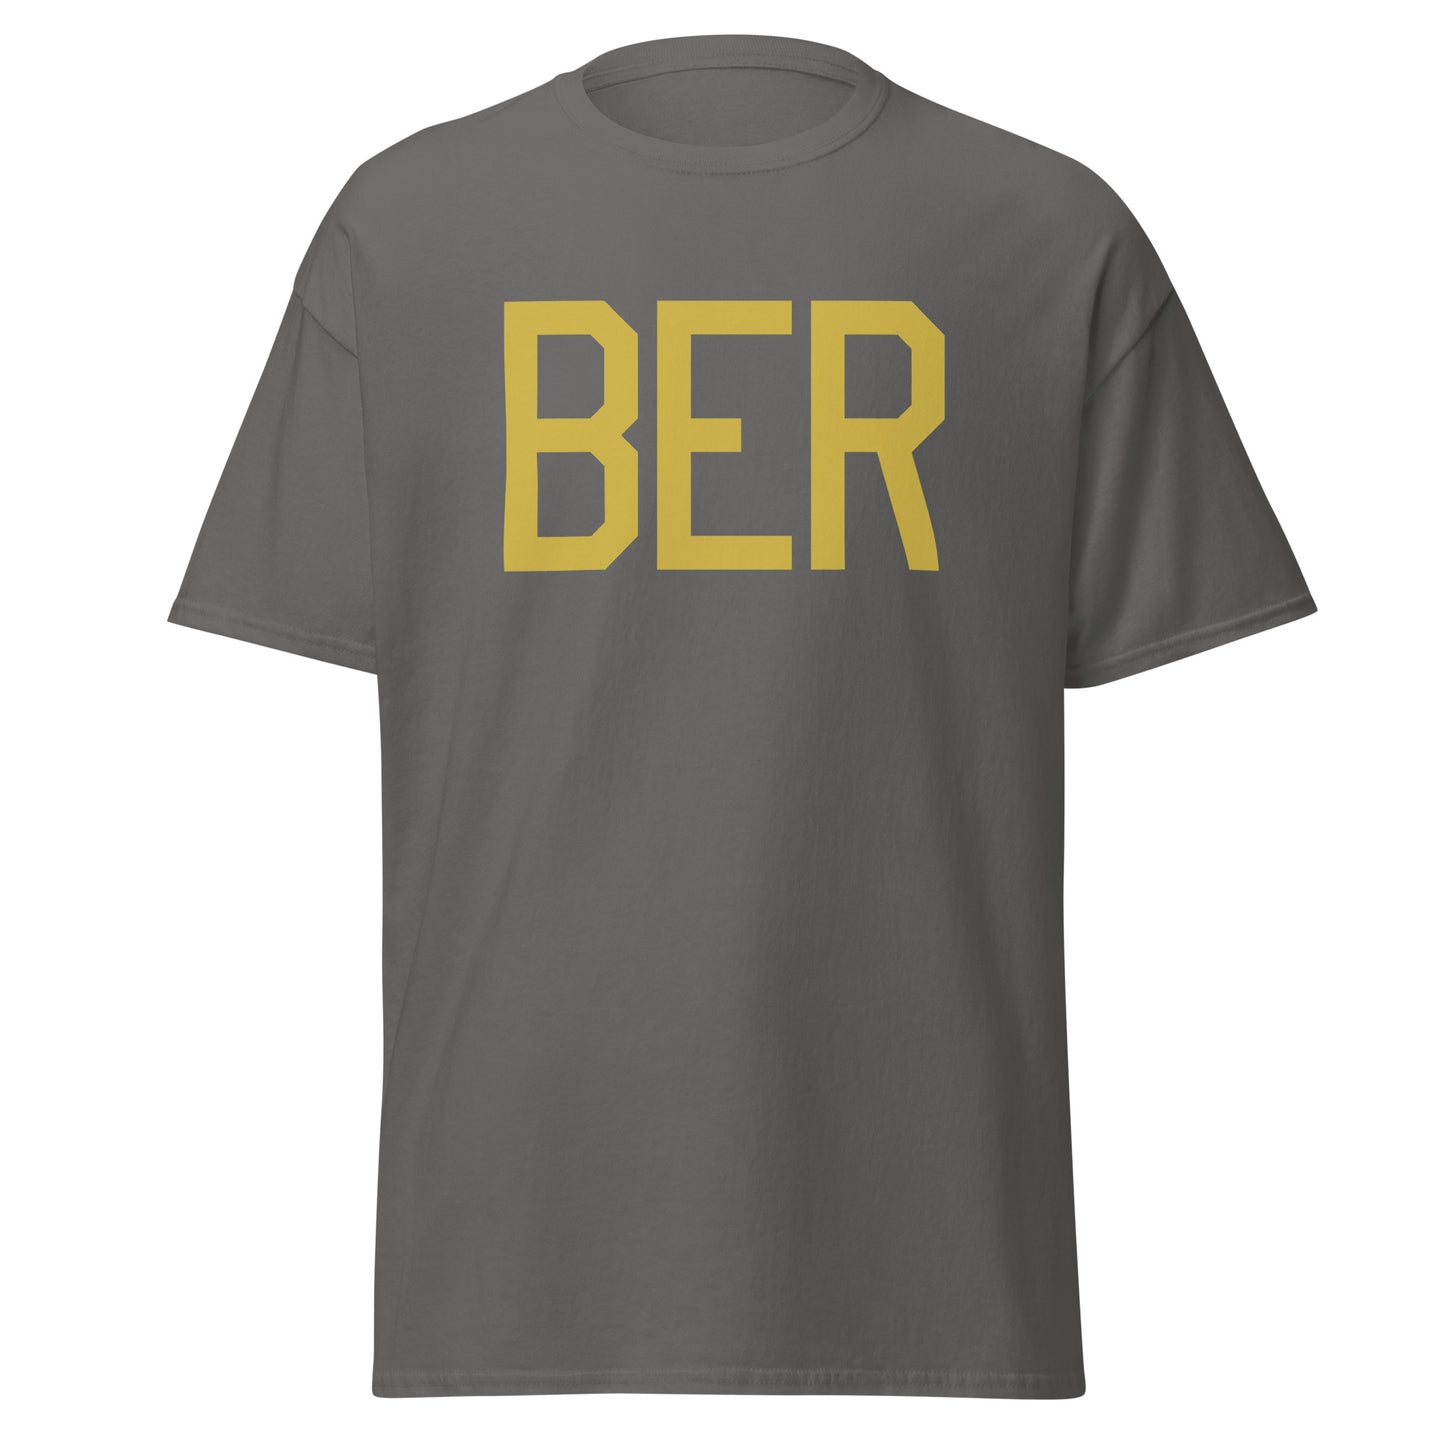 Aviation Enthusiast Men's Tee - Old Gold Graphic • BER Berlin • YHM Designs - Image 05